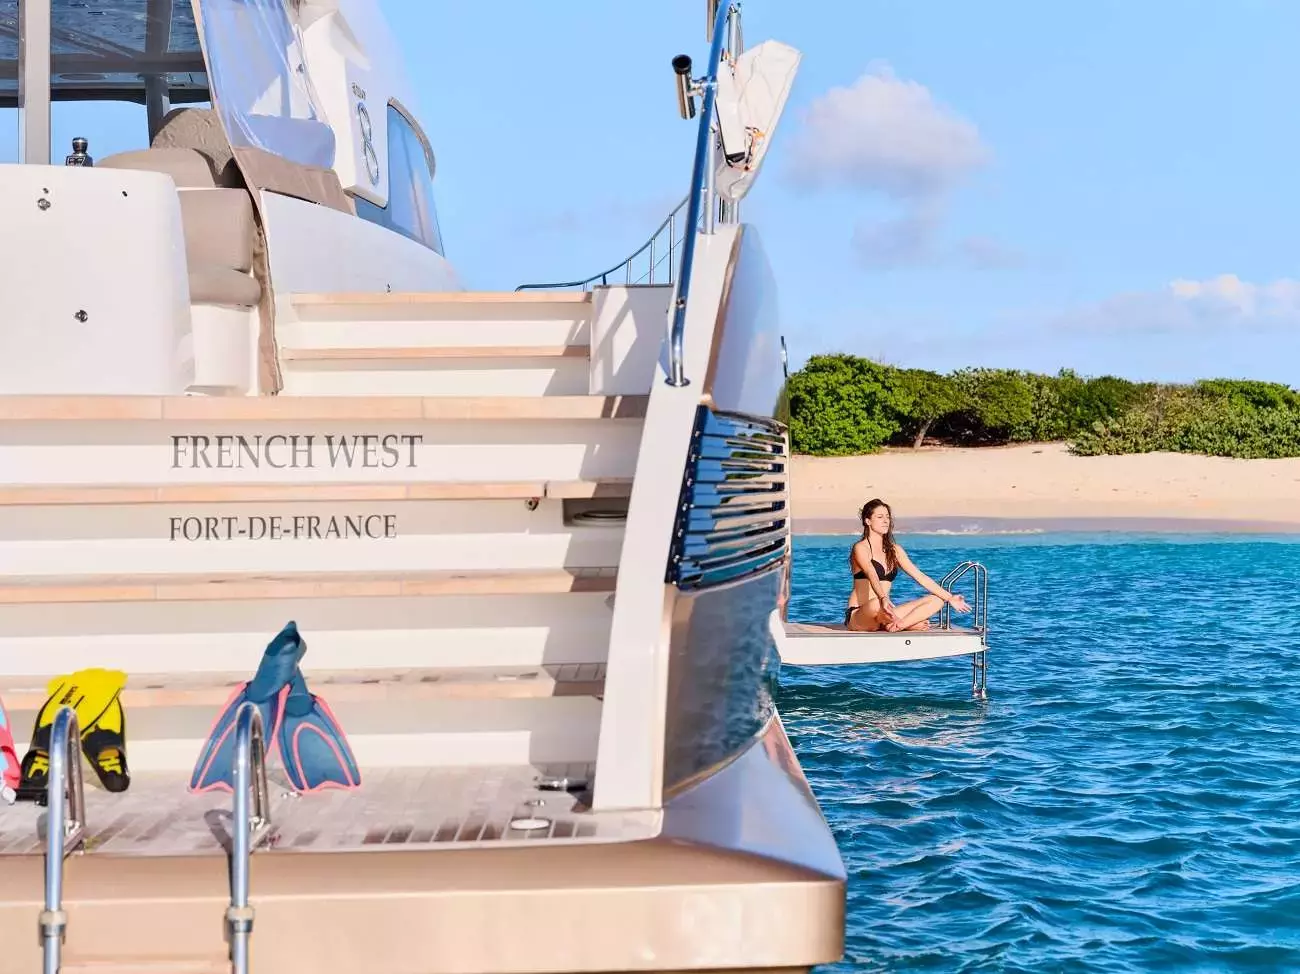 Frenchwest by Lagoon - Top rates for a Rental of a private Power Catamaran in St Barths